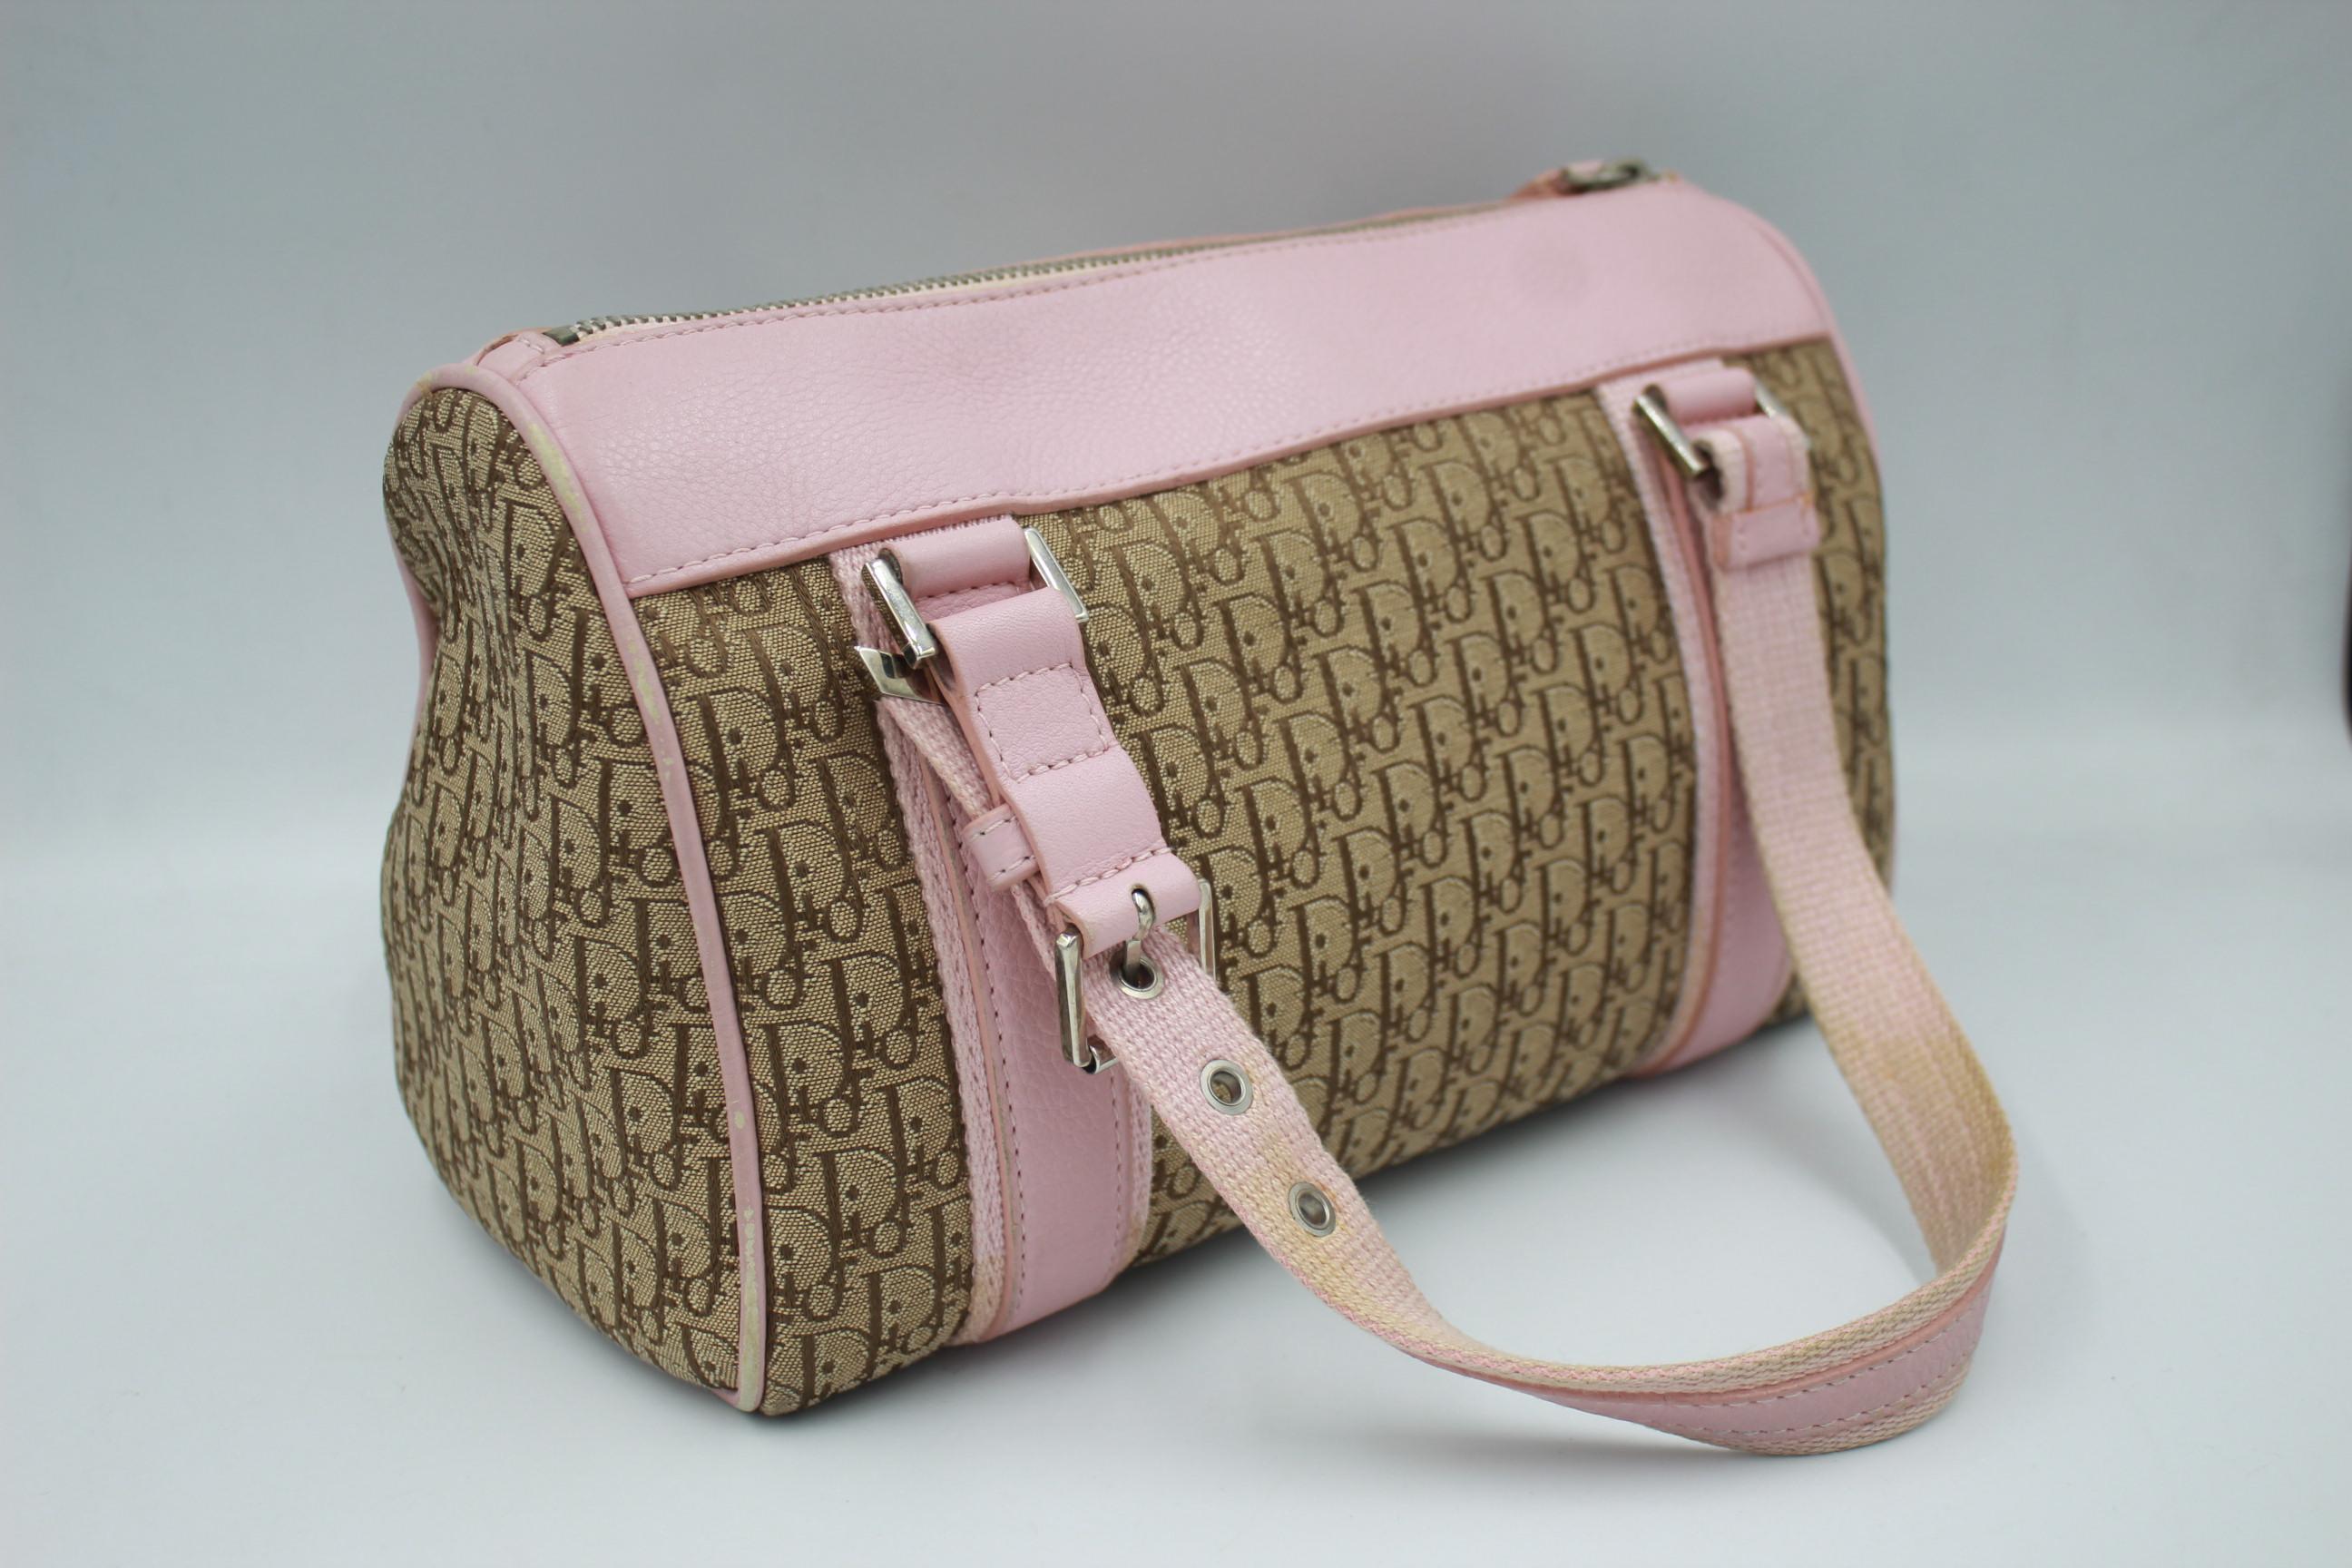 Dior bsoton handbag in monogram canvas and pink finishes
Good condition, with some signs of wear, at the borders and the wrists are a little stained.
25Cm x 14cm x 12cm
